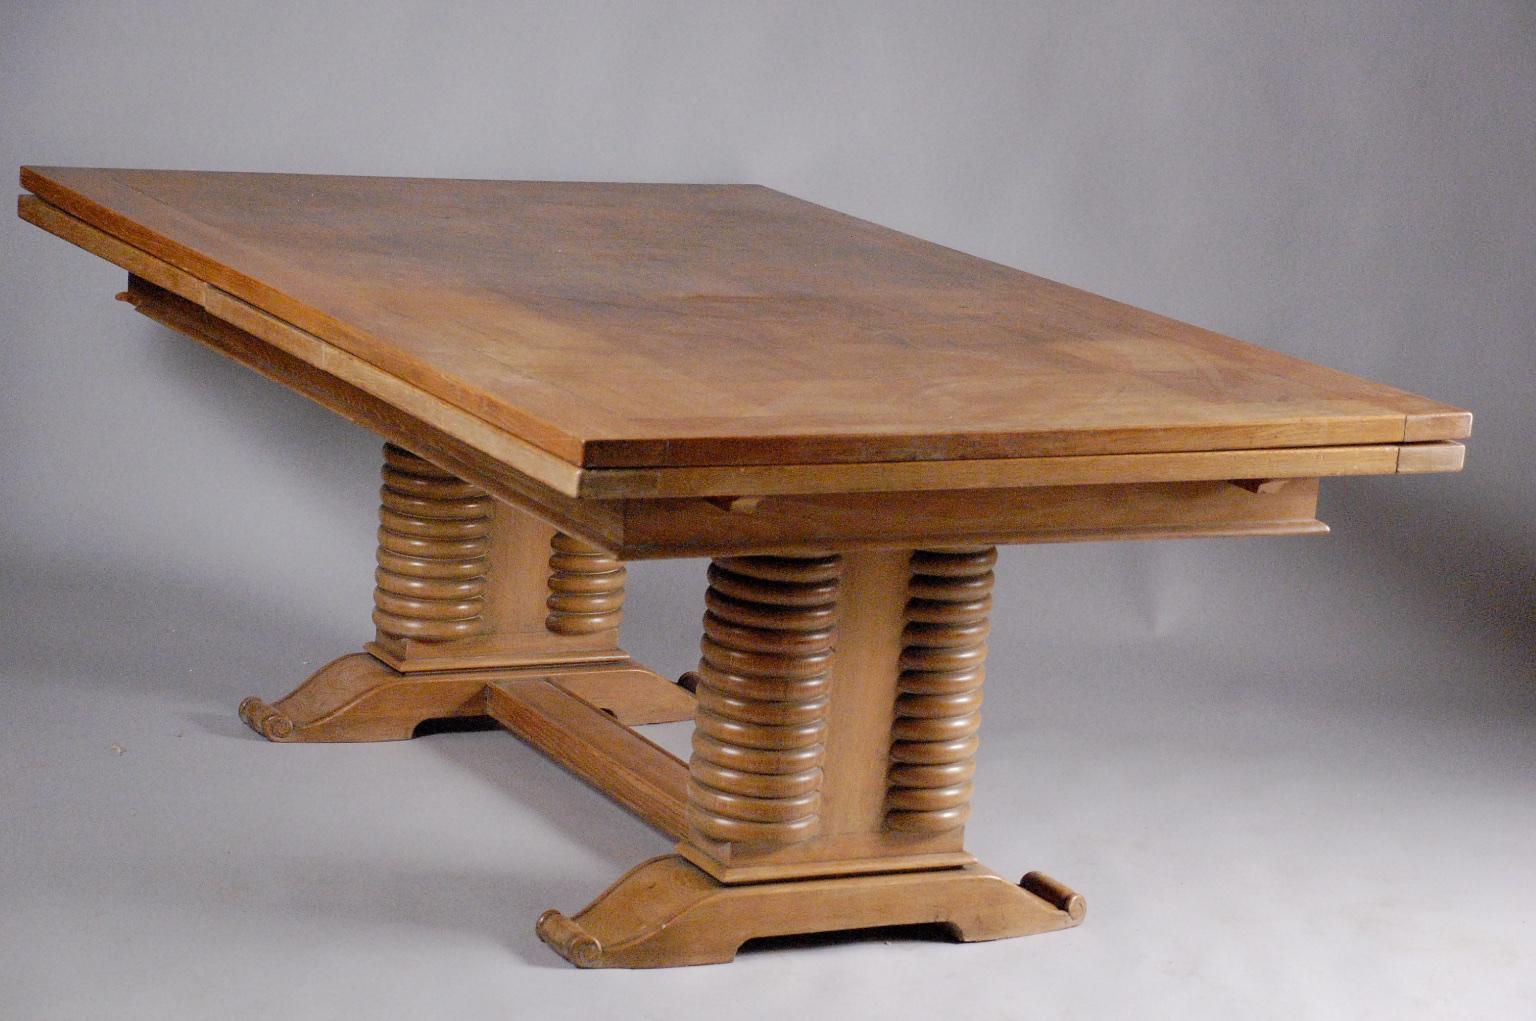 French Art Deco dining table in oak. Model presented at Exposition Internationale des Arts et
Techniques dans la Vie Moderne, Paris 1937. Pictured in the portfolio from the exposition. This table is 70